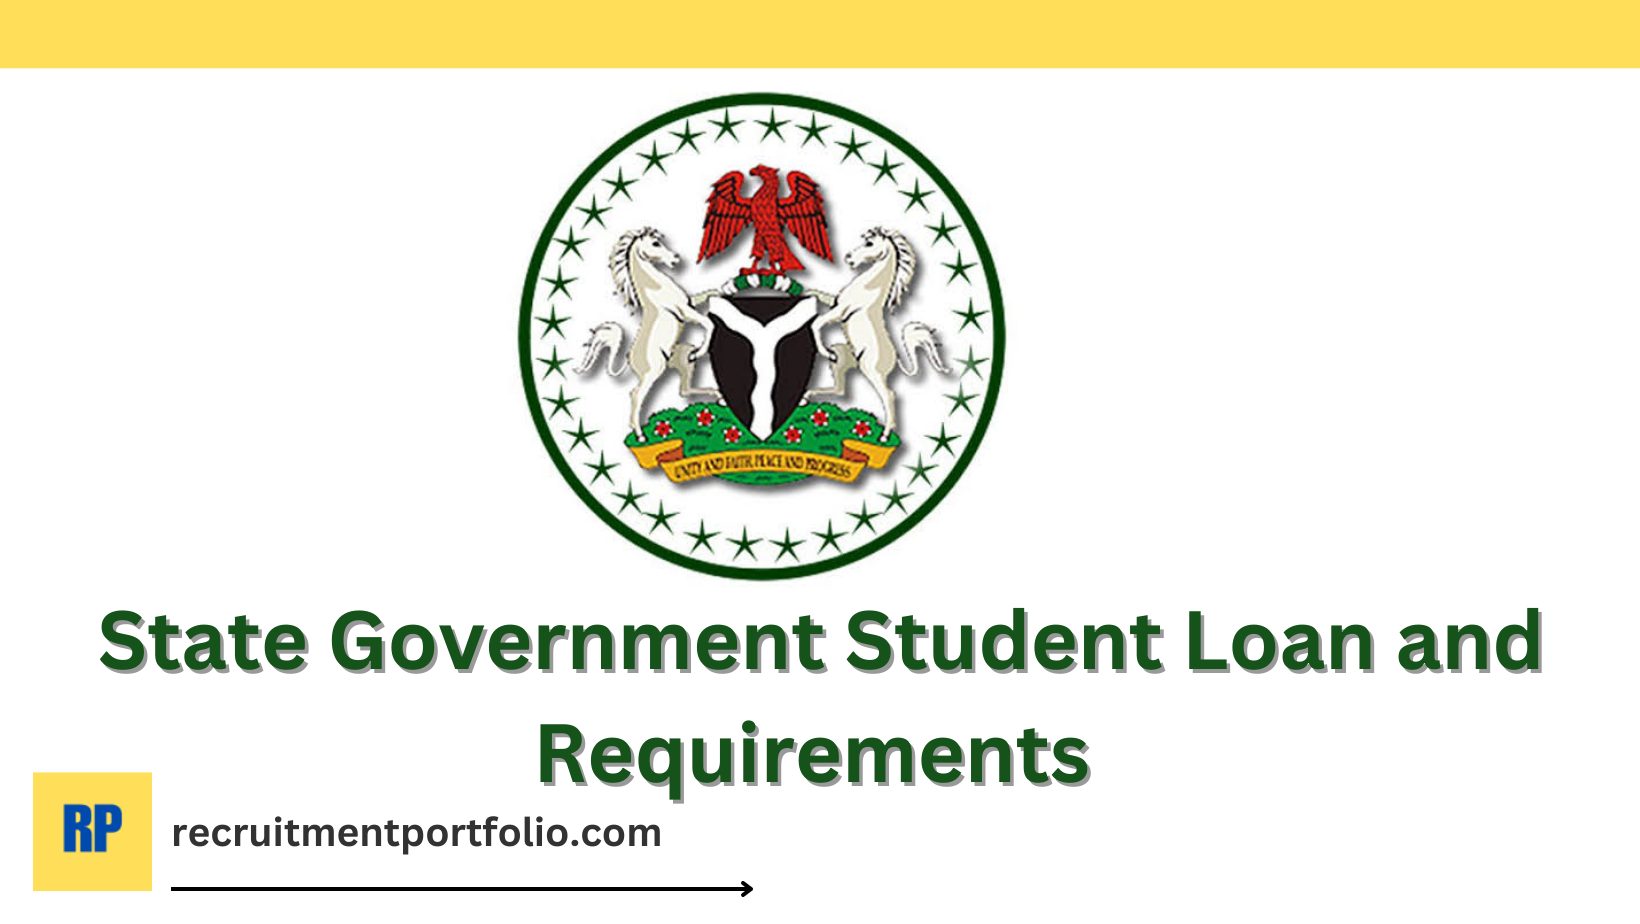 State Government Student Loan